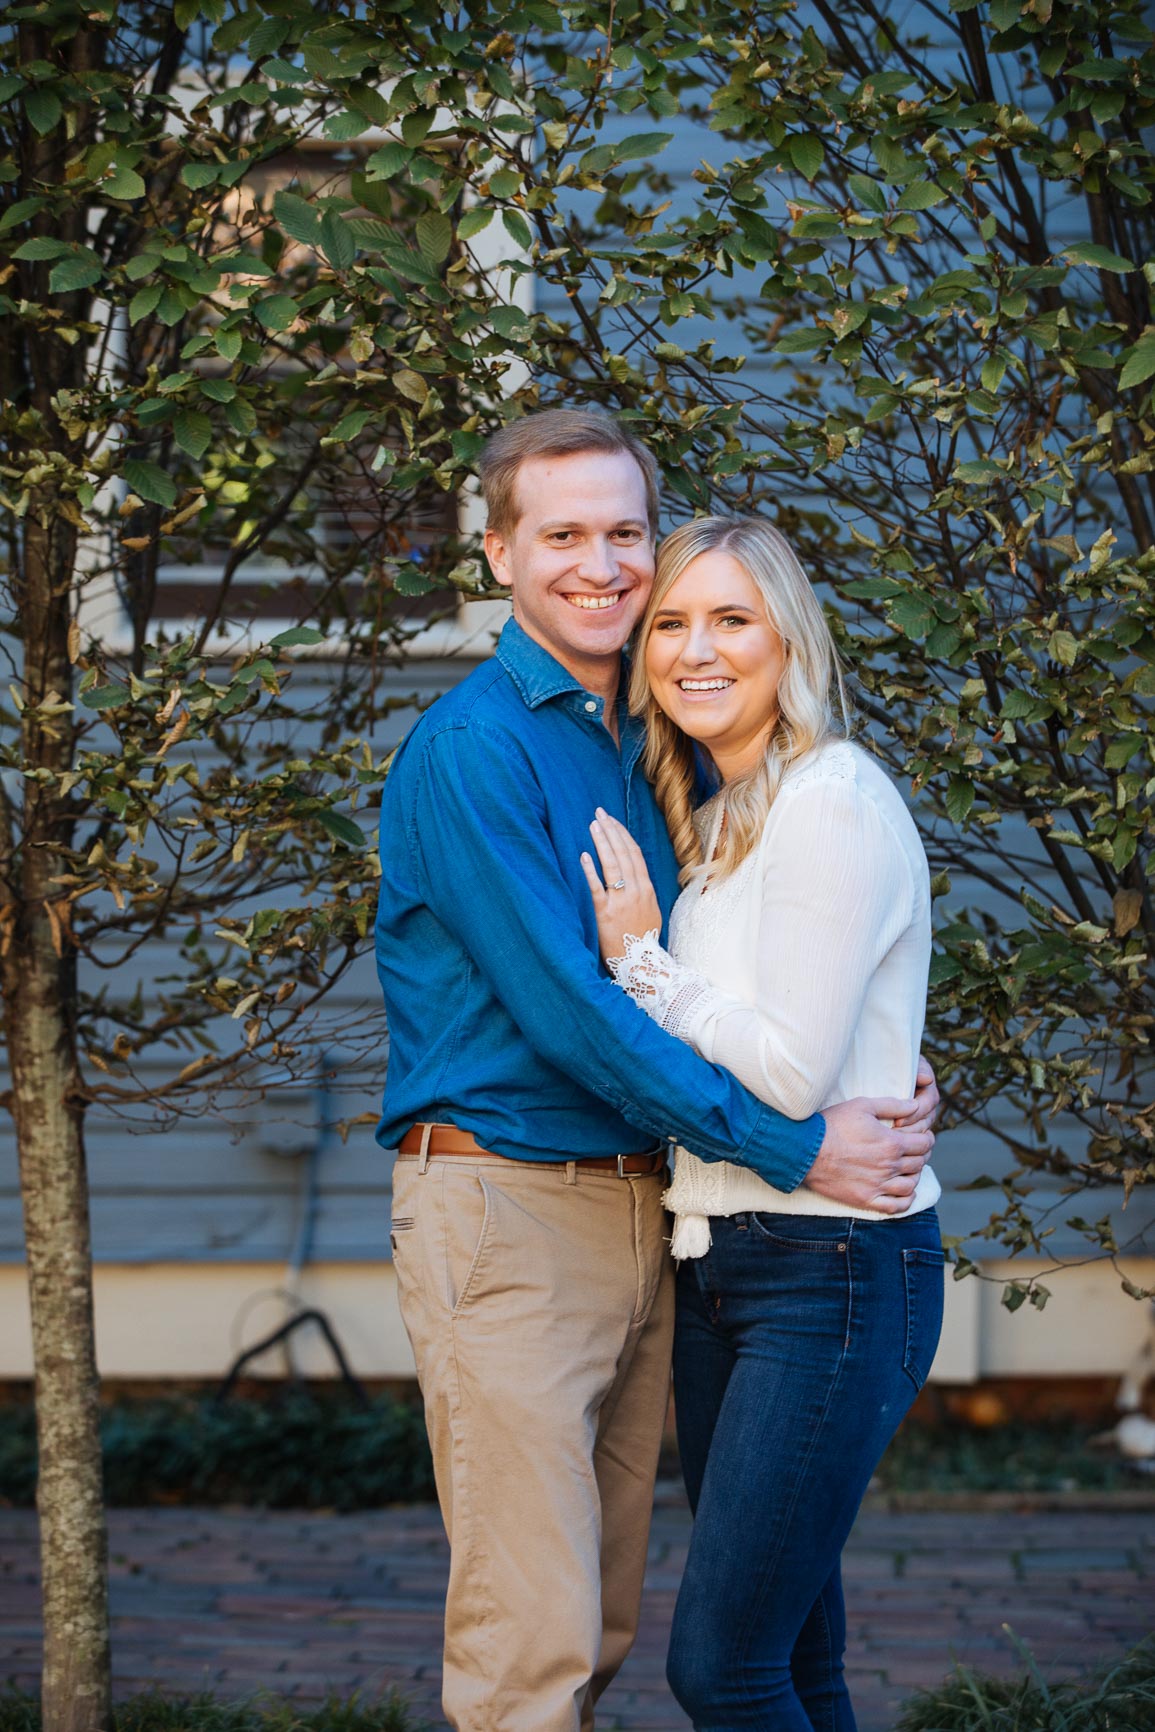 Uptown Charlotte fall engagement session at fourth ward historic neighborhood shot by nhieu tang photography | nhieutang.com